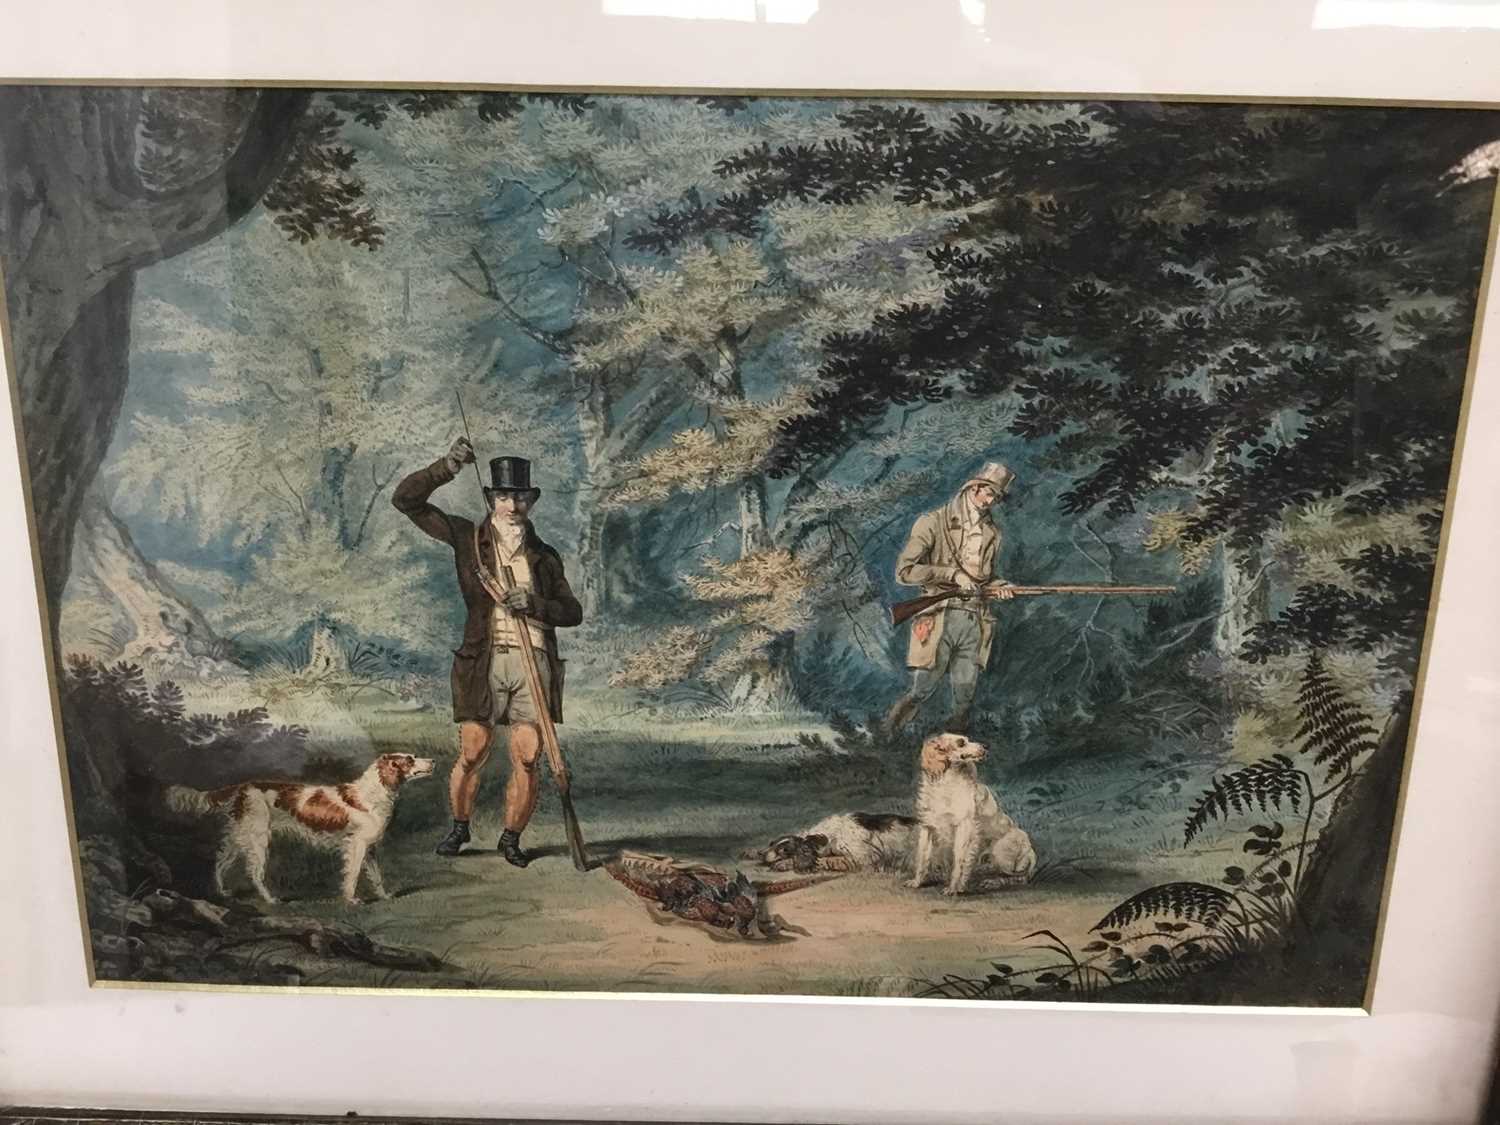 Lot 72 - Pair of good quality 19th century hand coloured hunting etchings in the style of Howitt, framed and glazed